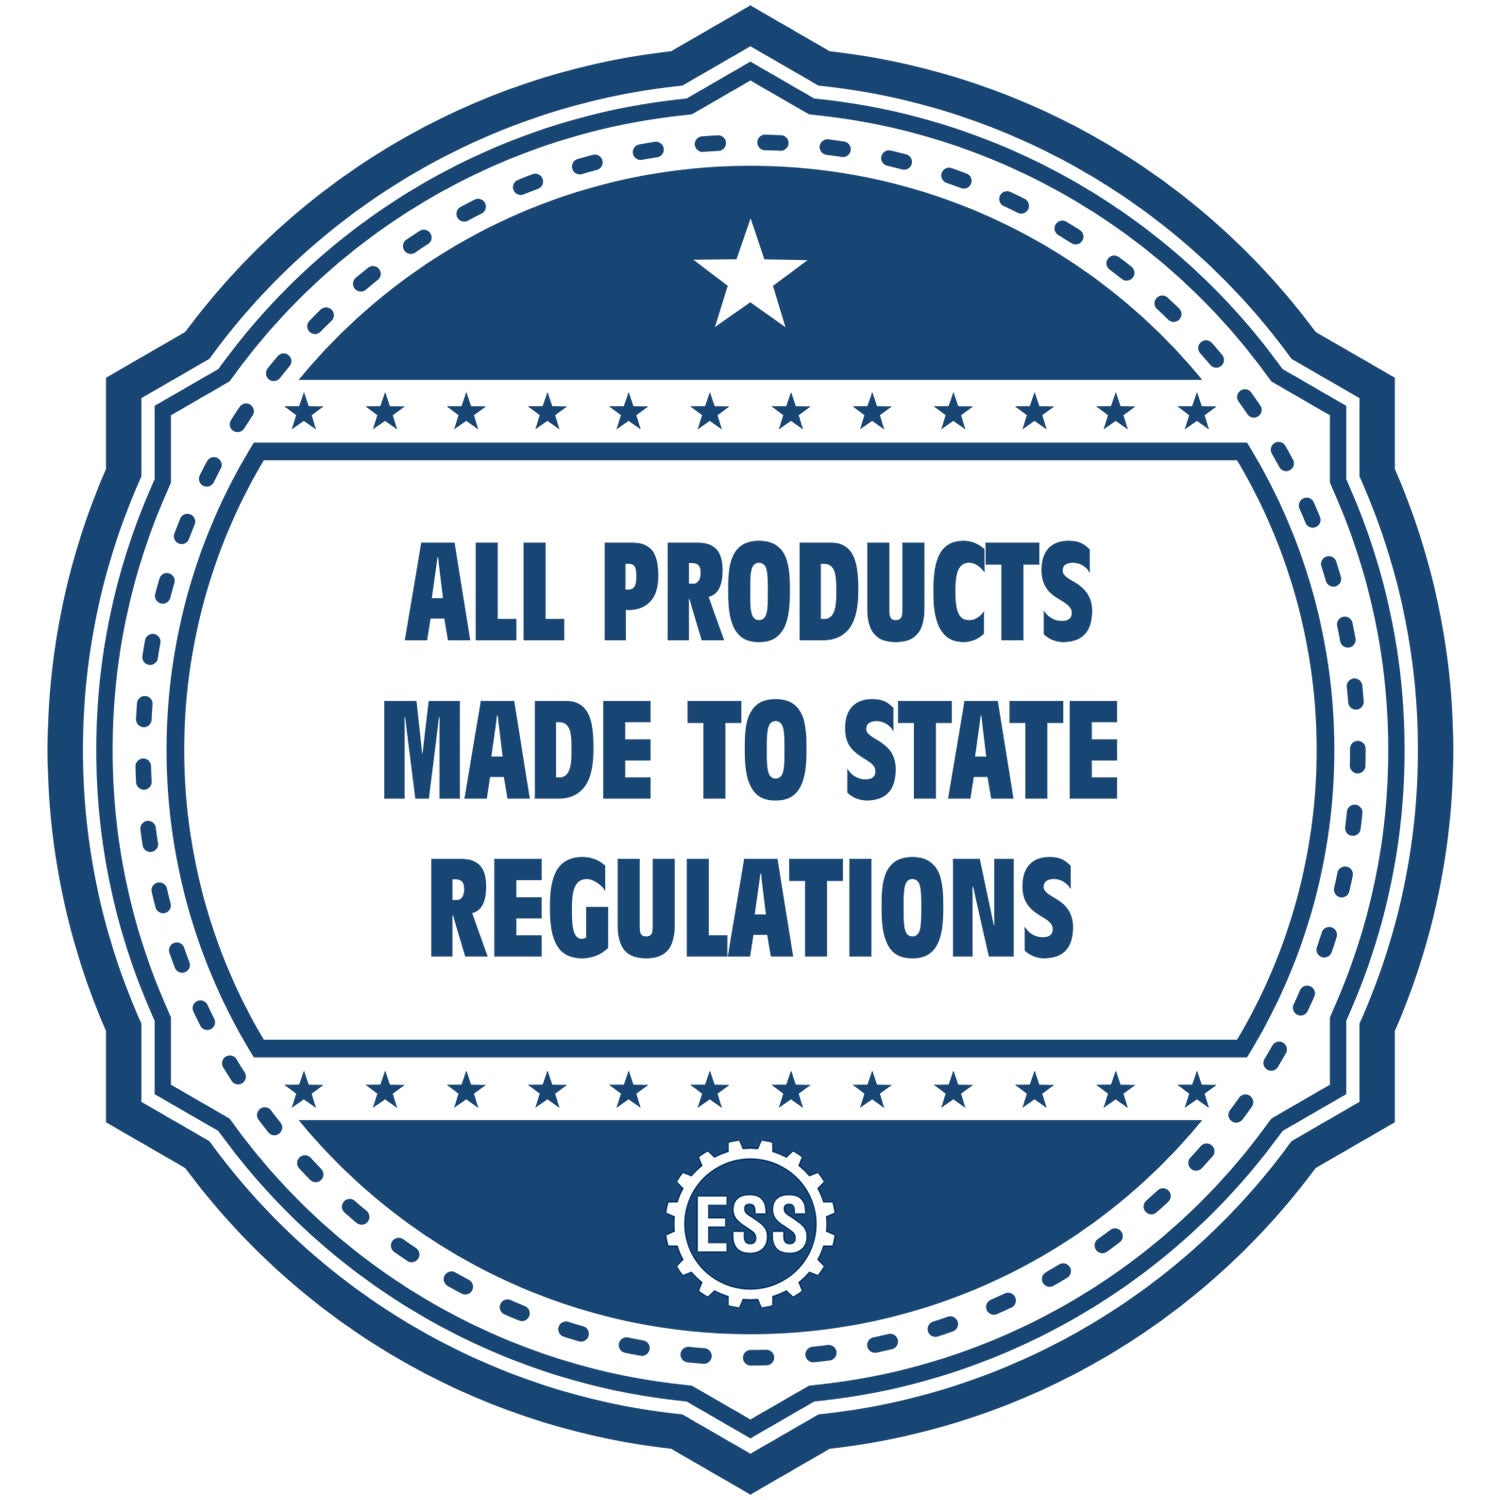 An icon or badge element for the Self-Inking Indiana PE Stamp showing that this product is made in compliance with state regulations.